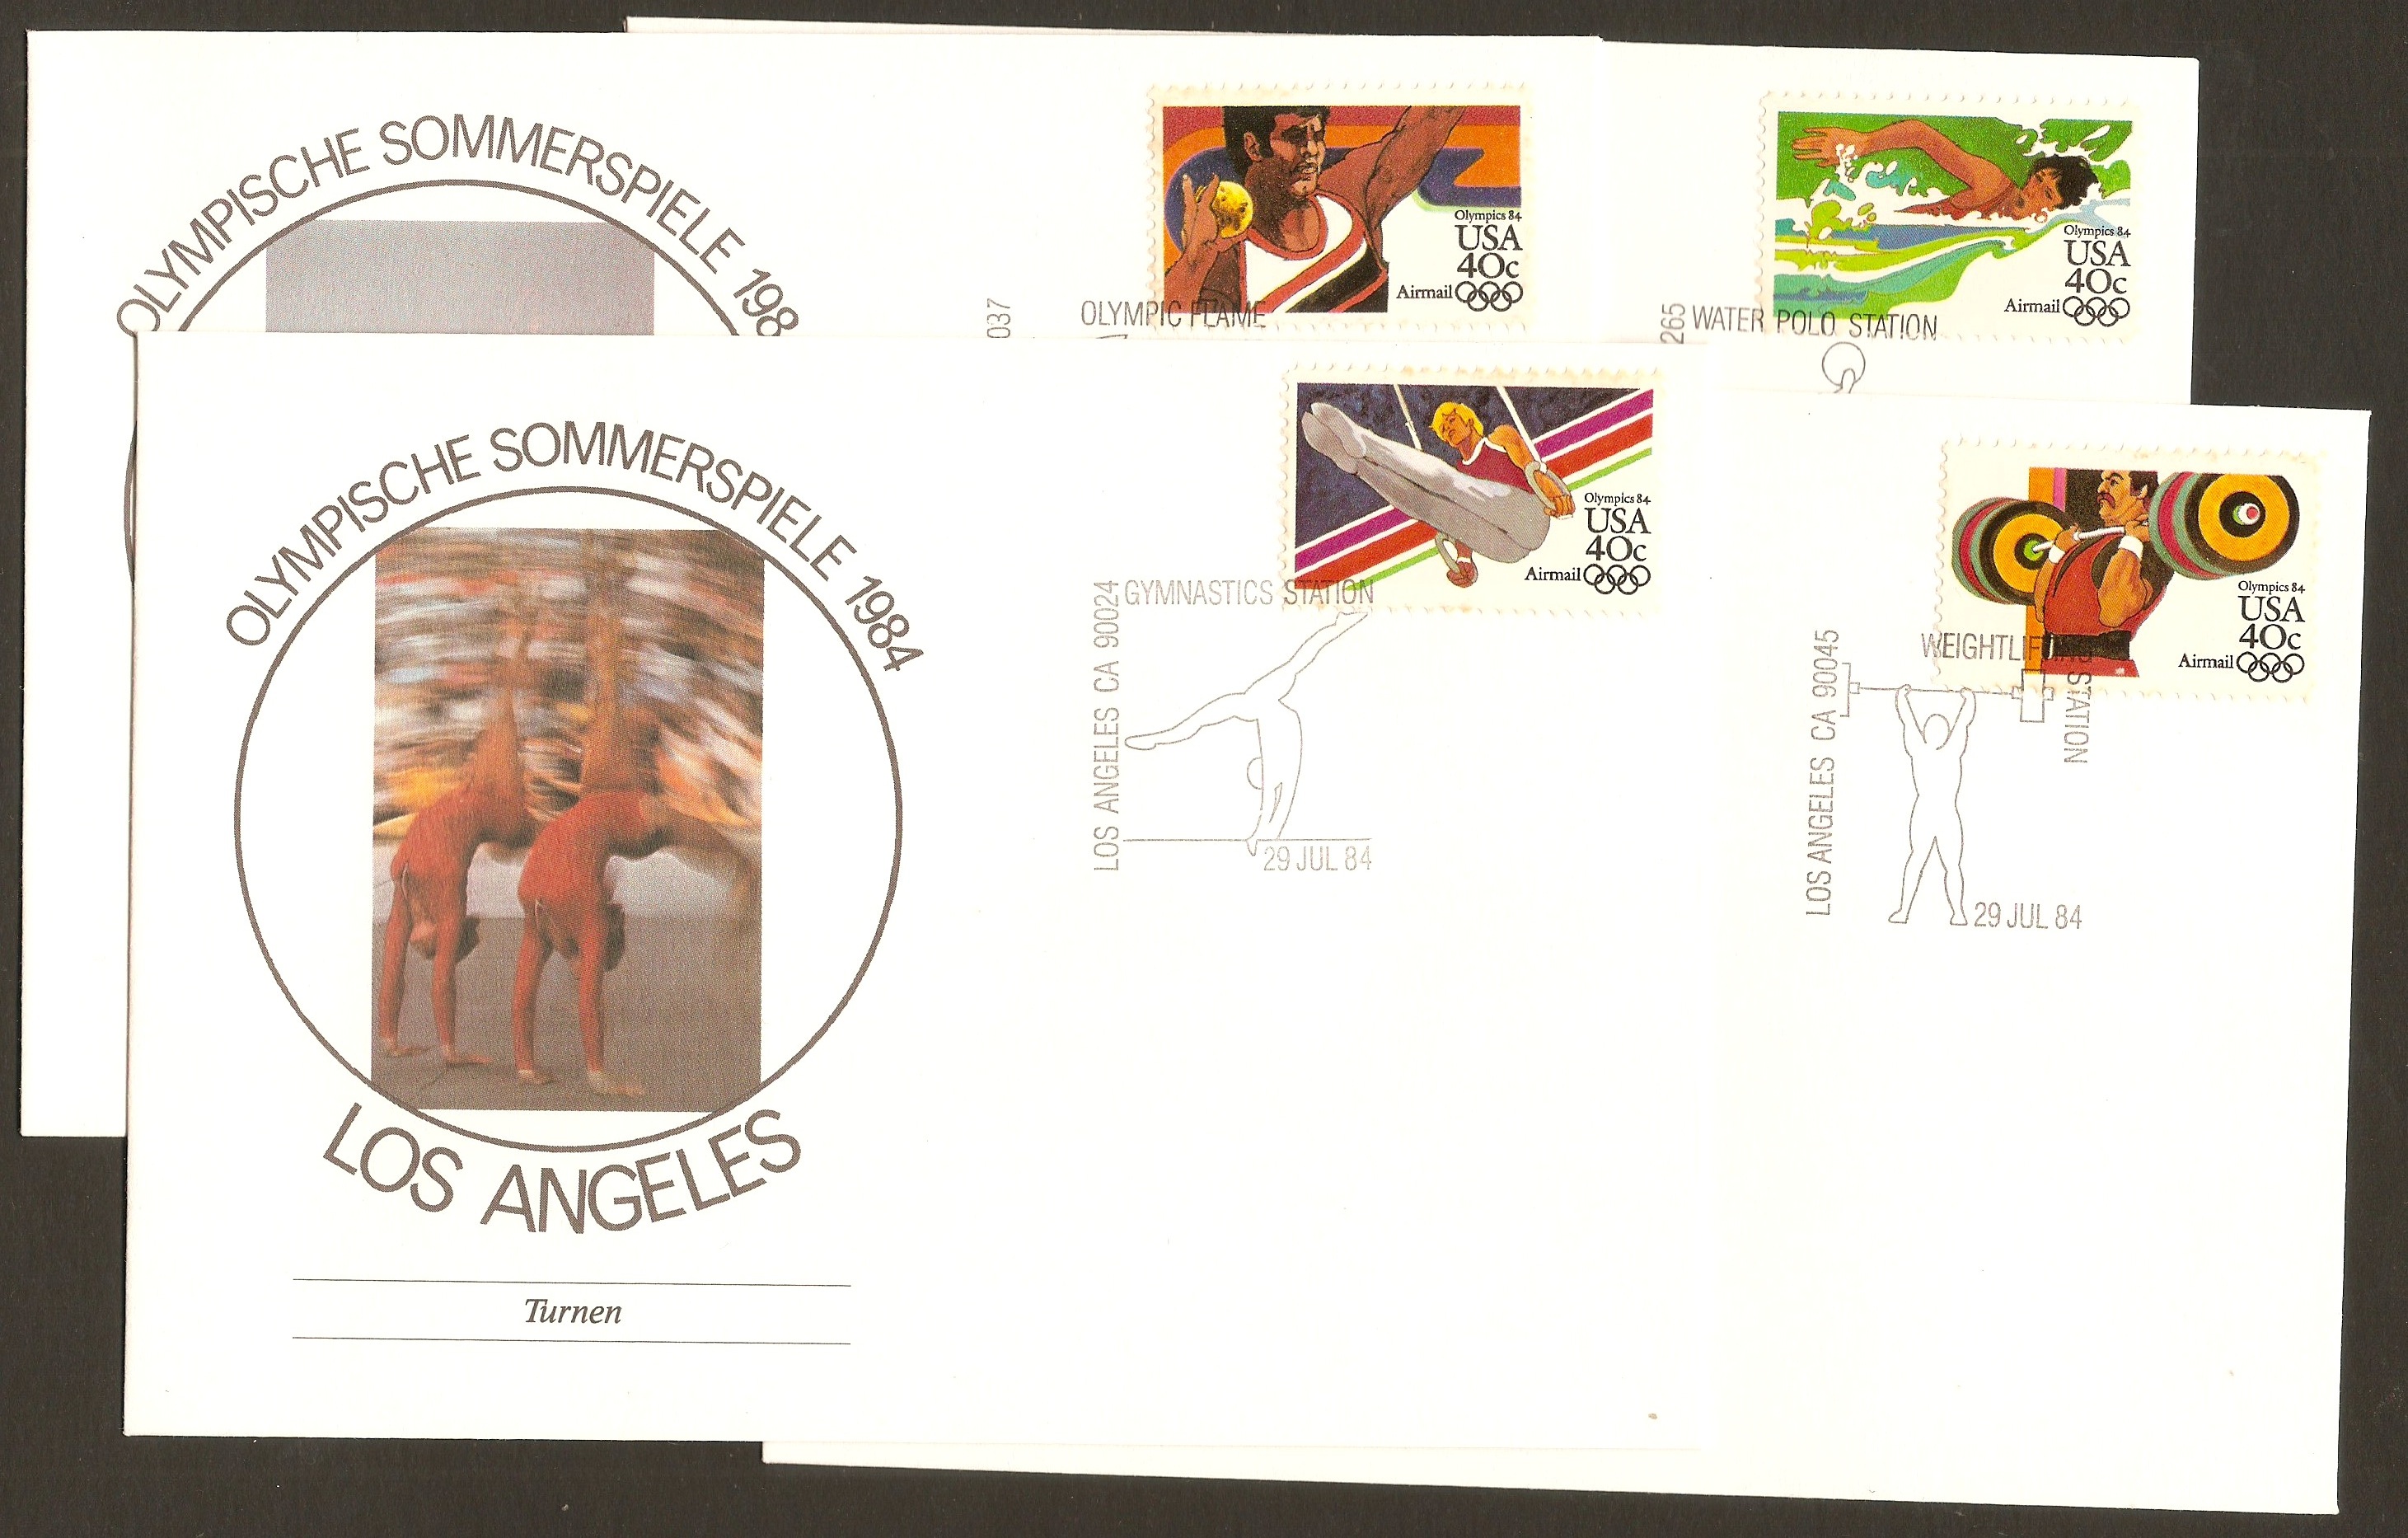 United States 1983 Los Angeles Olympics Souvenir Covers.